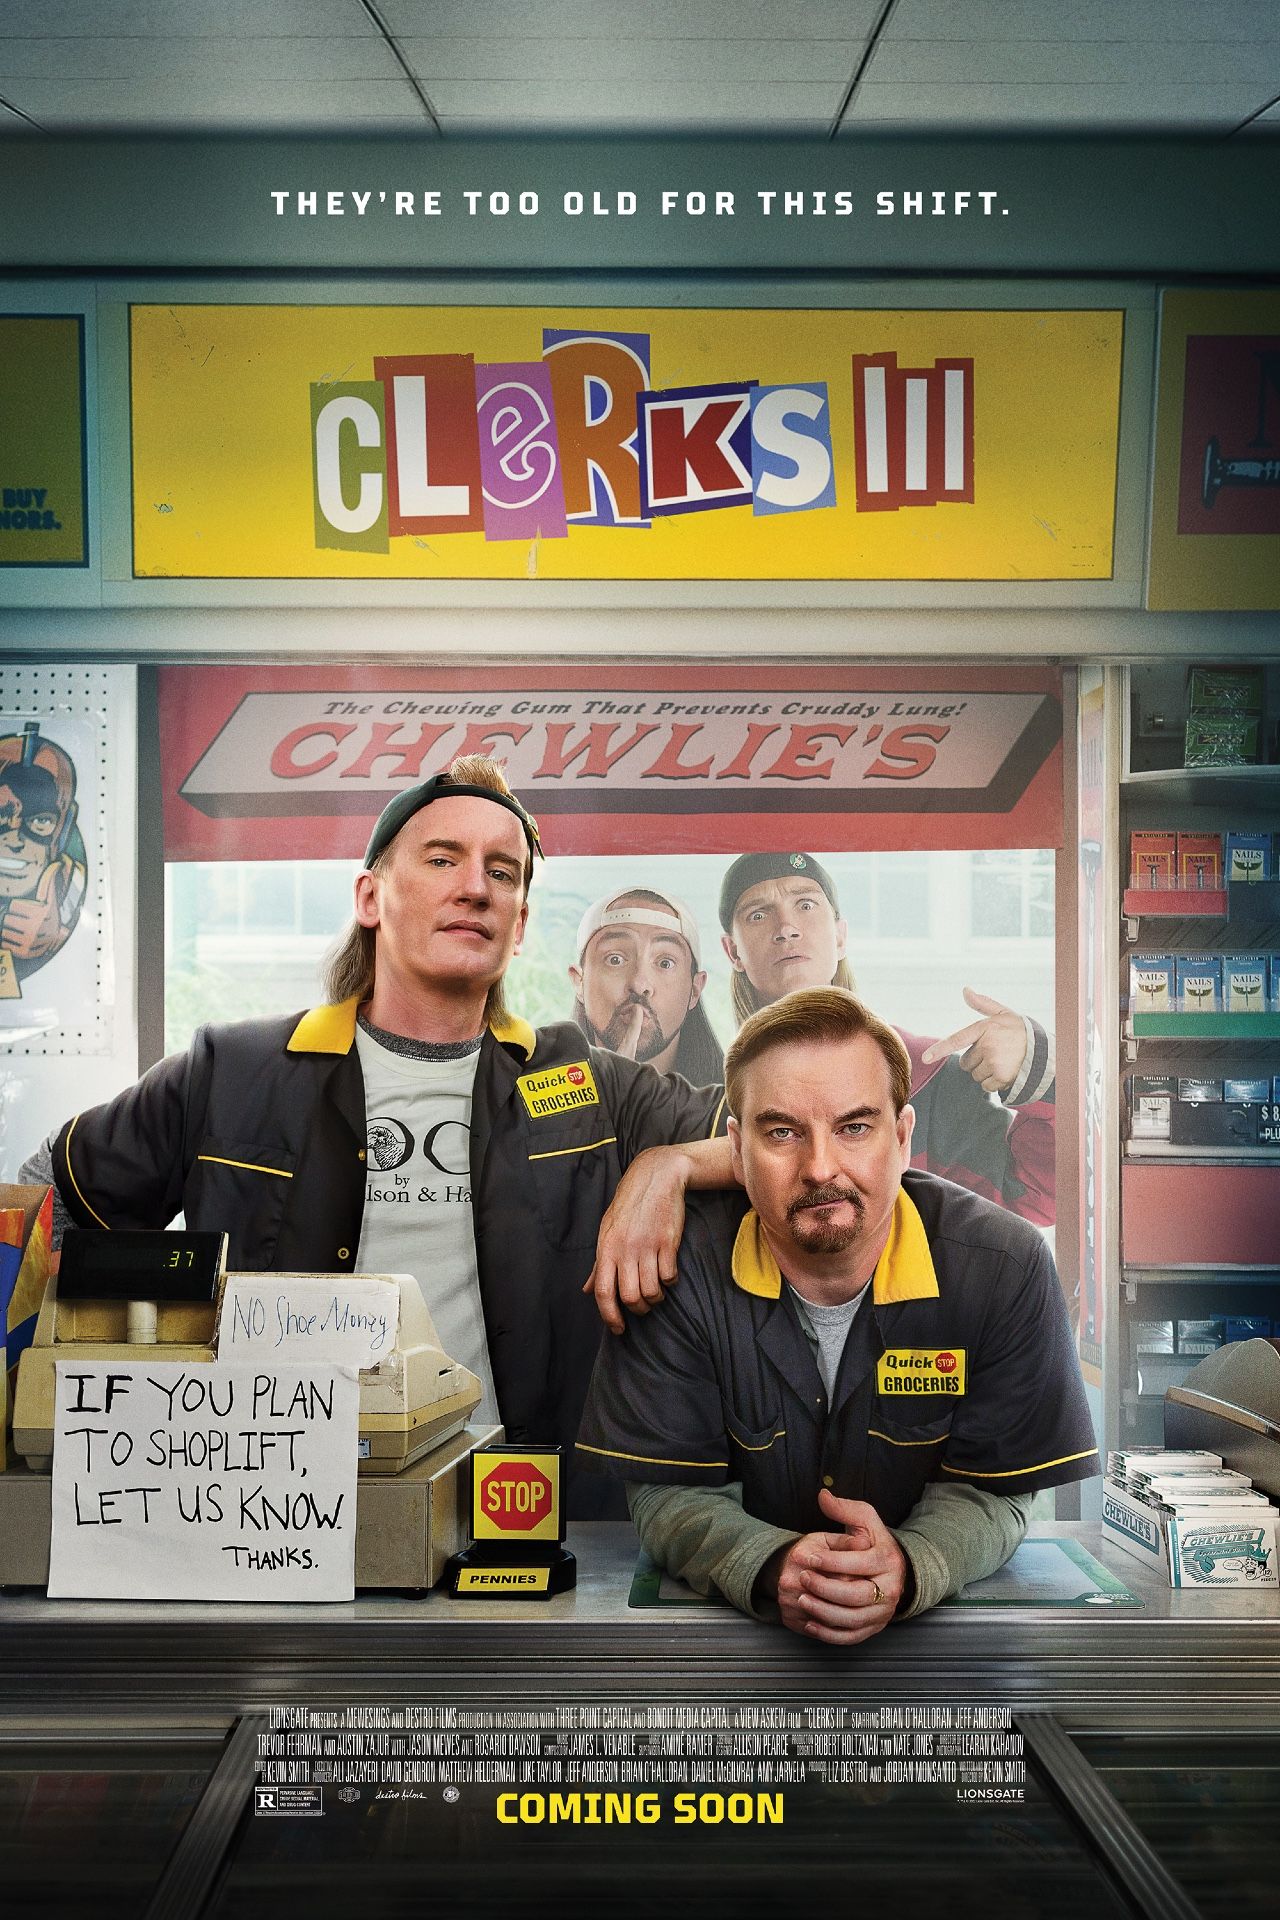 The Cast on the Clerks III Official Poster